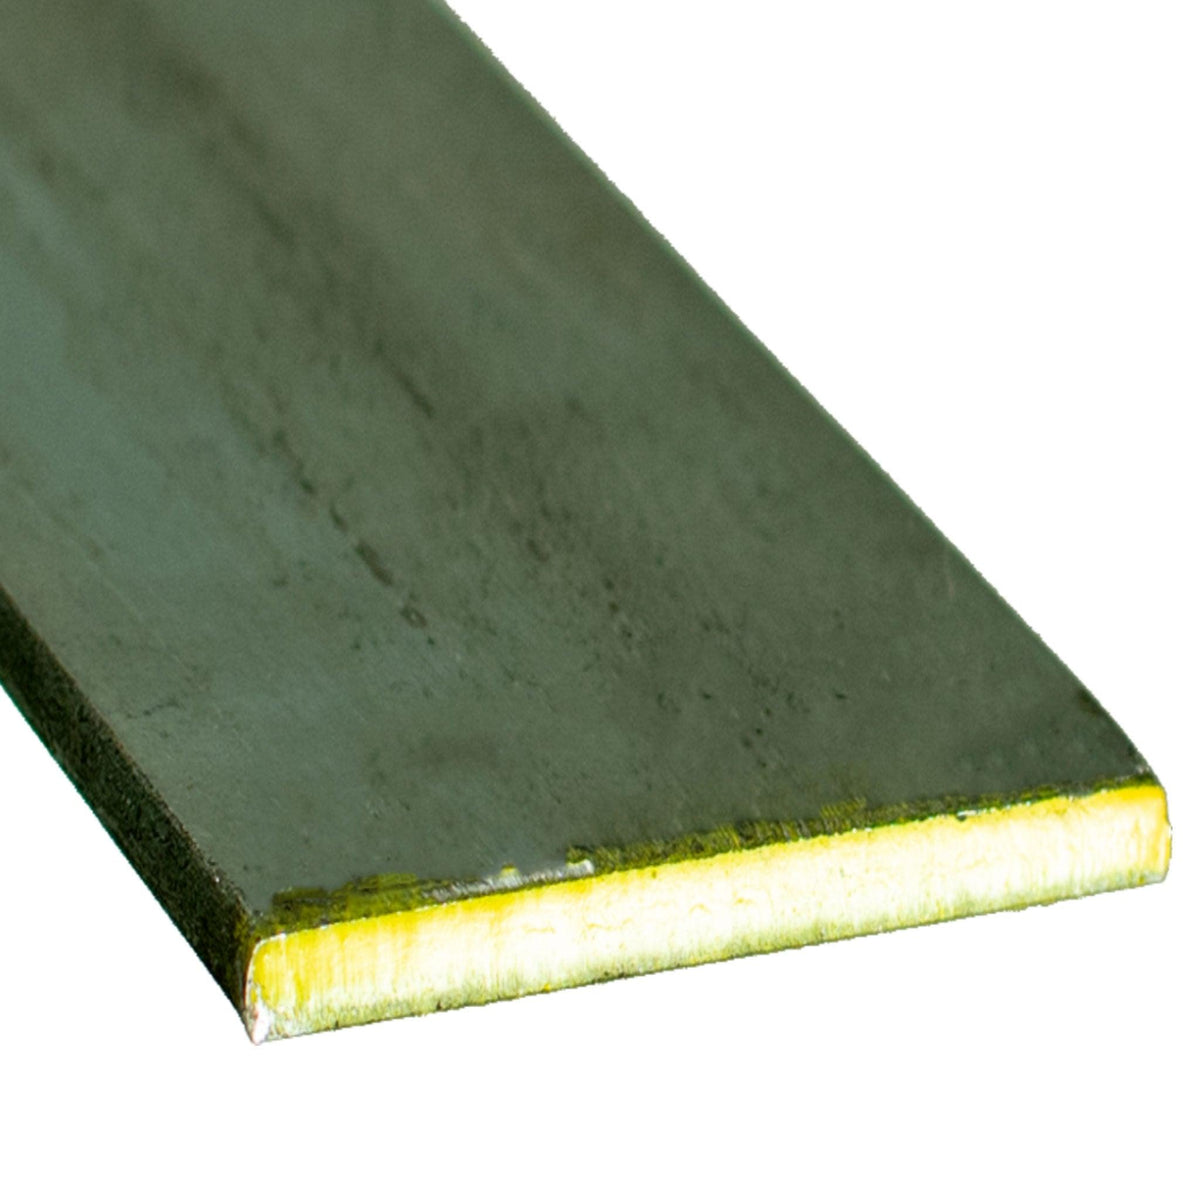 Hot Rolled Flat Bar Steel Raw Materials Sold at Lee Display - 1in X 3FT